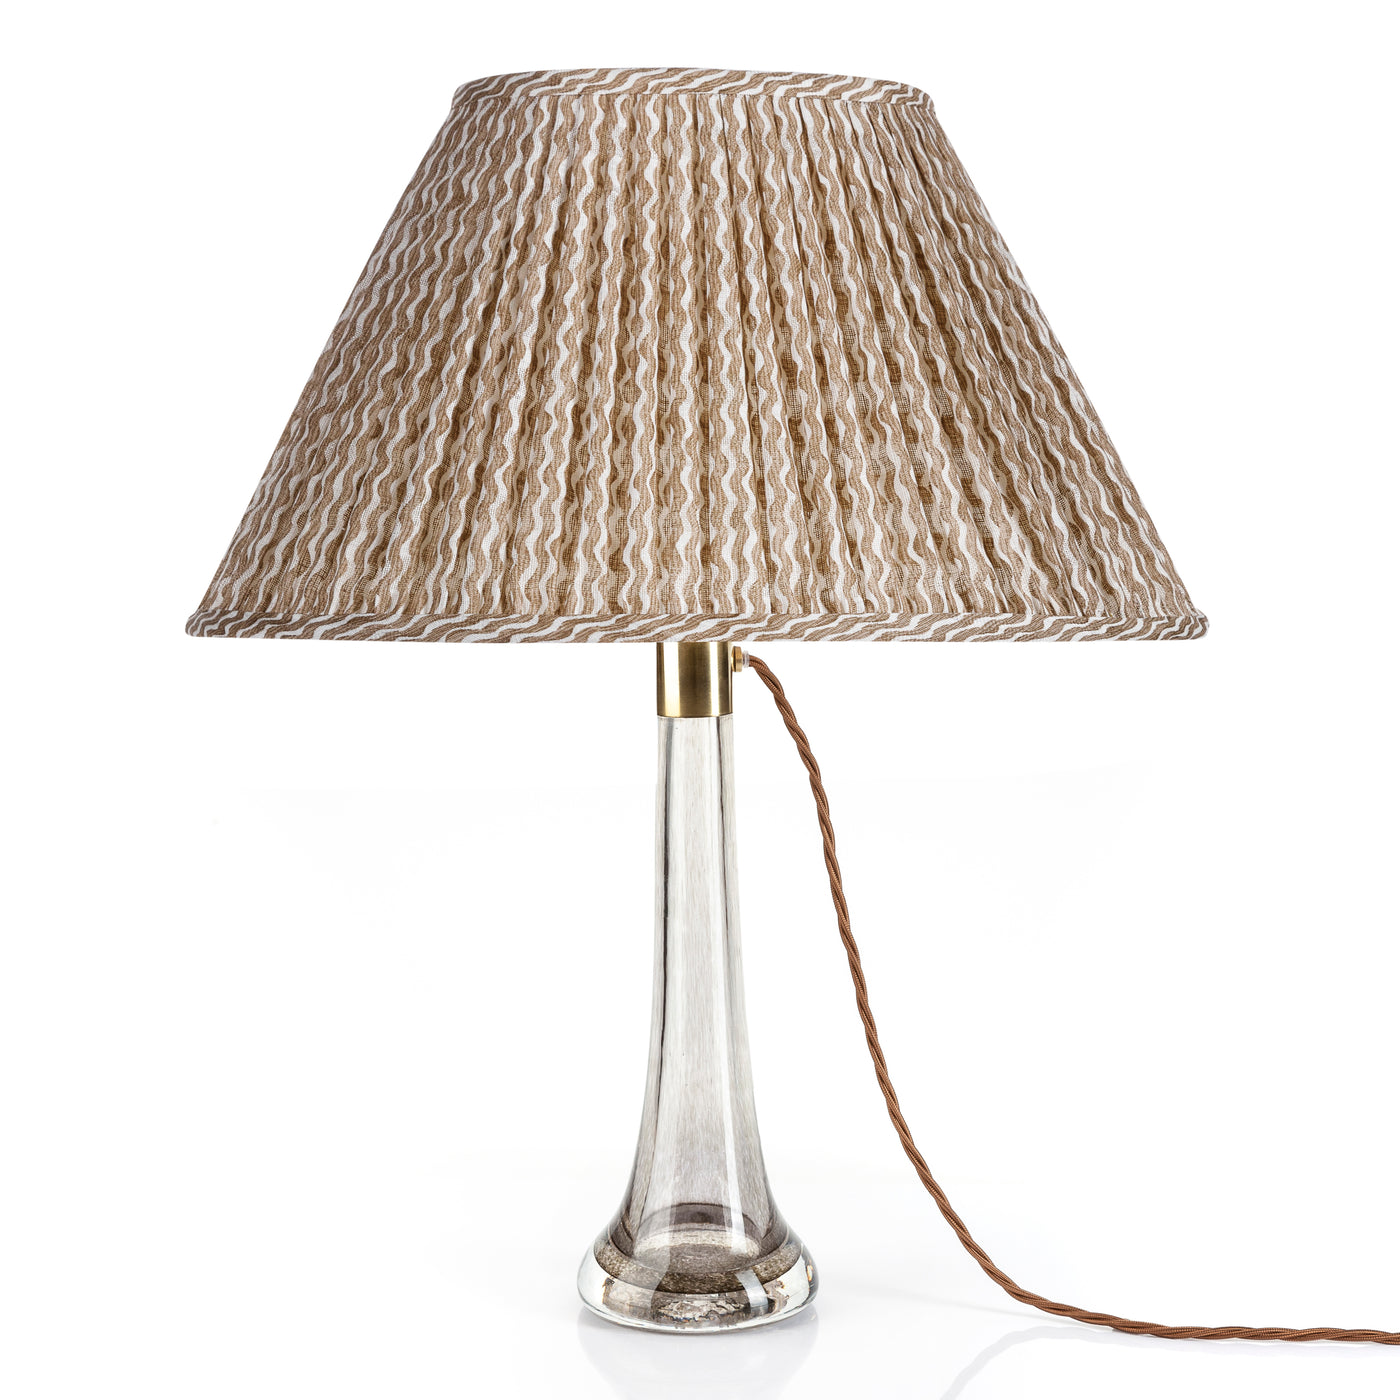 Oval Fermoie Lampshade - Popple in Nut Brown | Newport Lamp And Shade | Located in Newport, RI